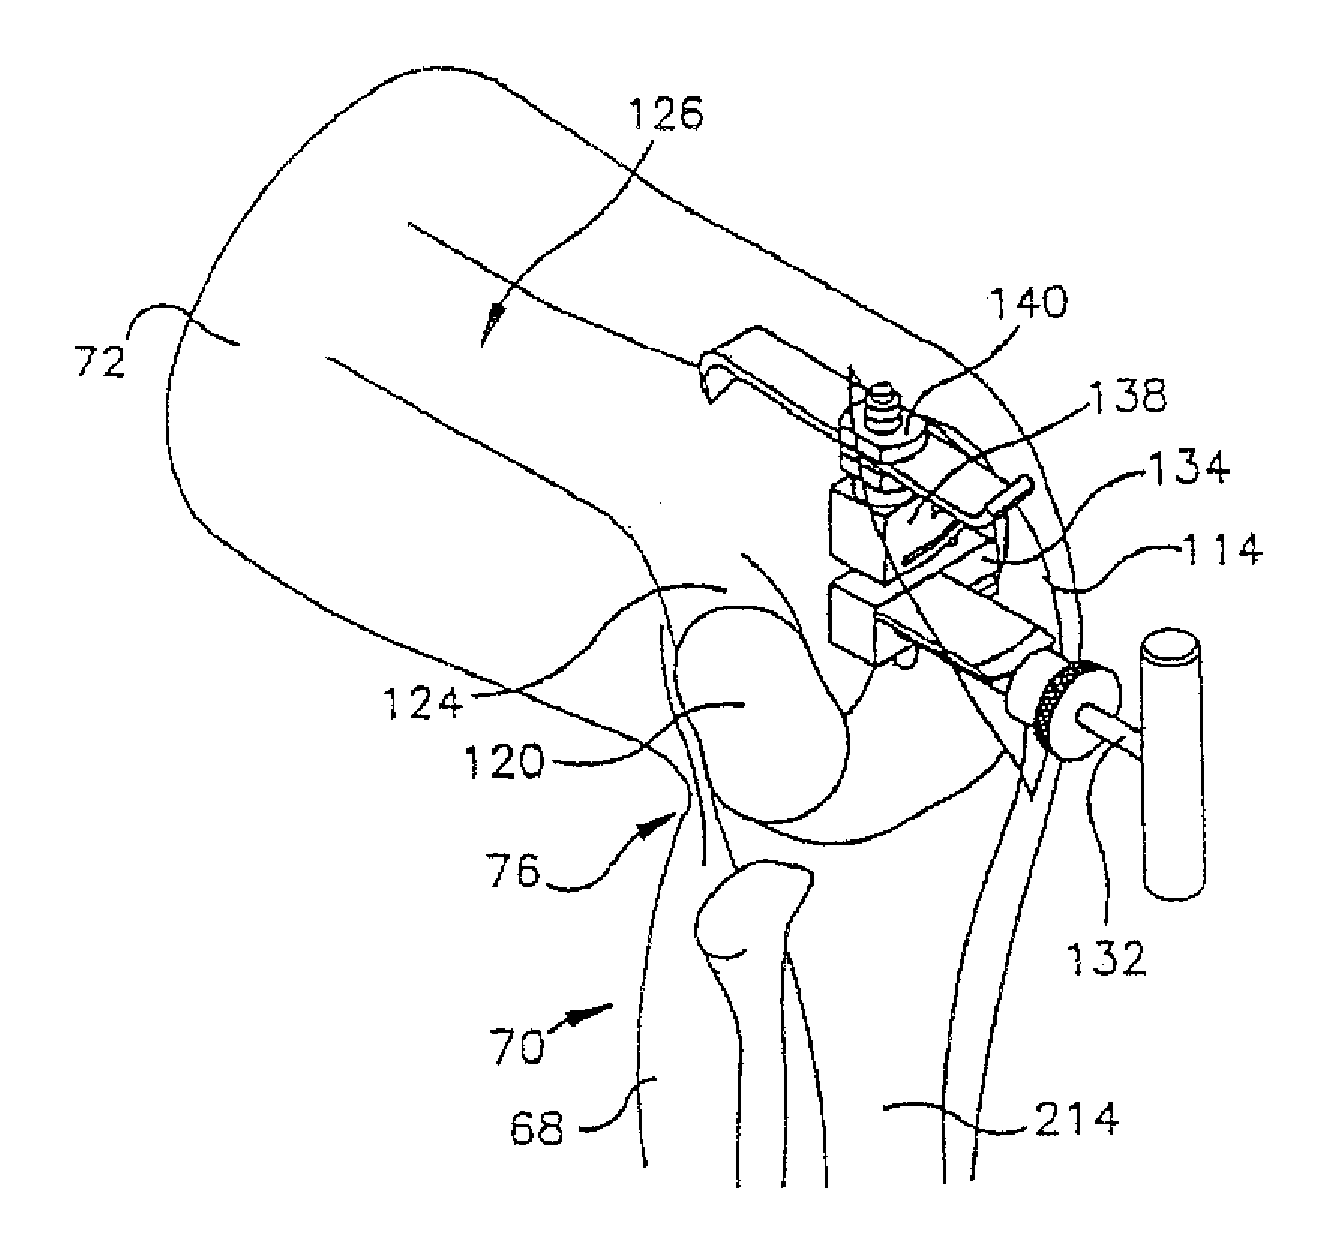 Minimally Invasive Surgical Systems and Methods